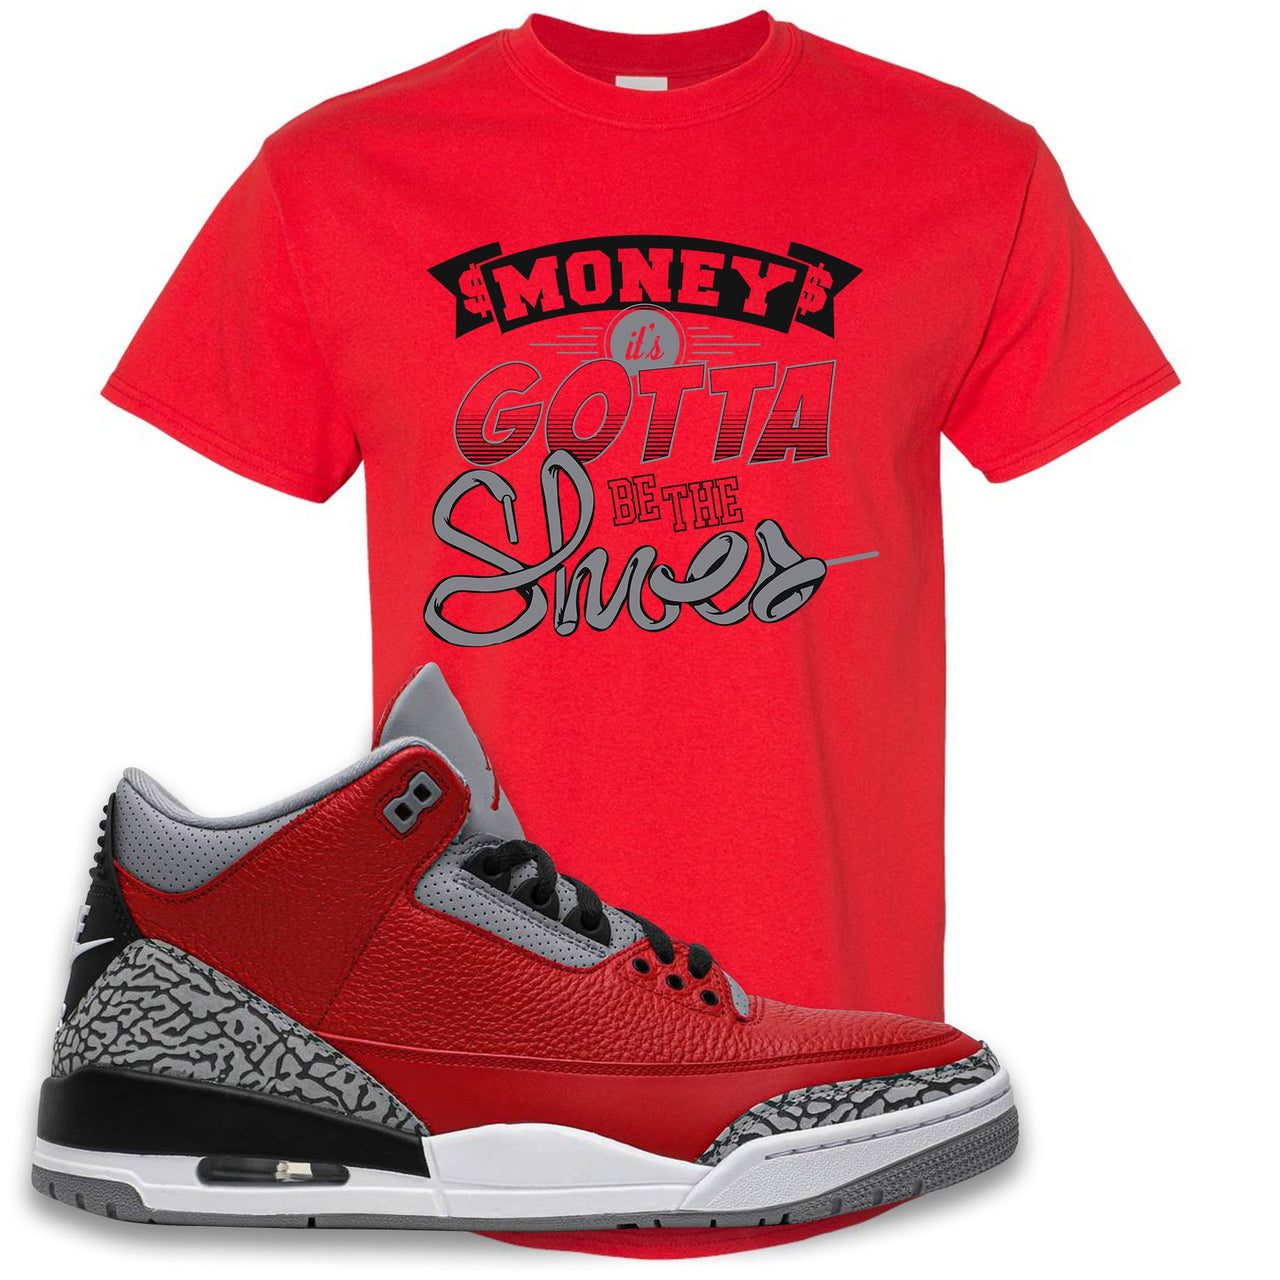 Jordan 3 Red Cement Chicago All-Star Sneaker True Red T Shirt | Tees to match Jordan 3 All Star Red Cement Shoes | Money Its The Shoes